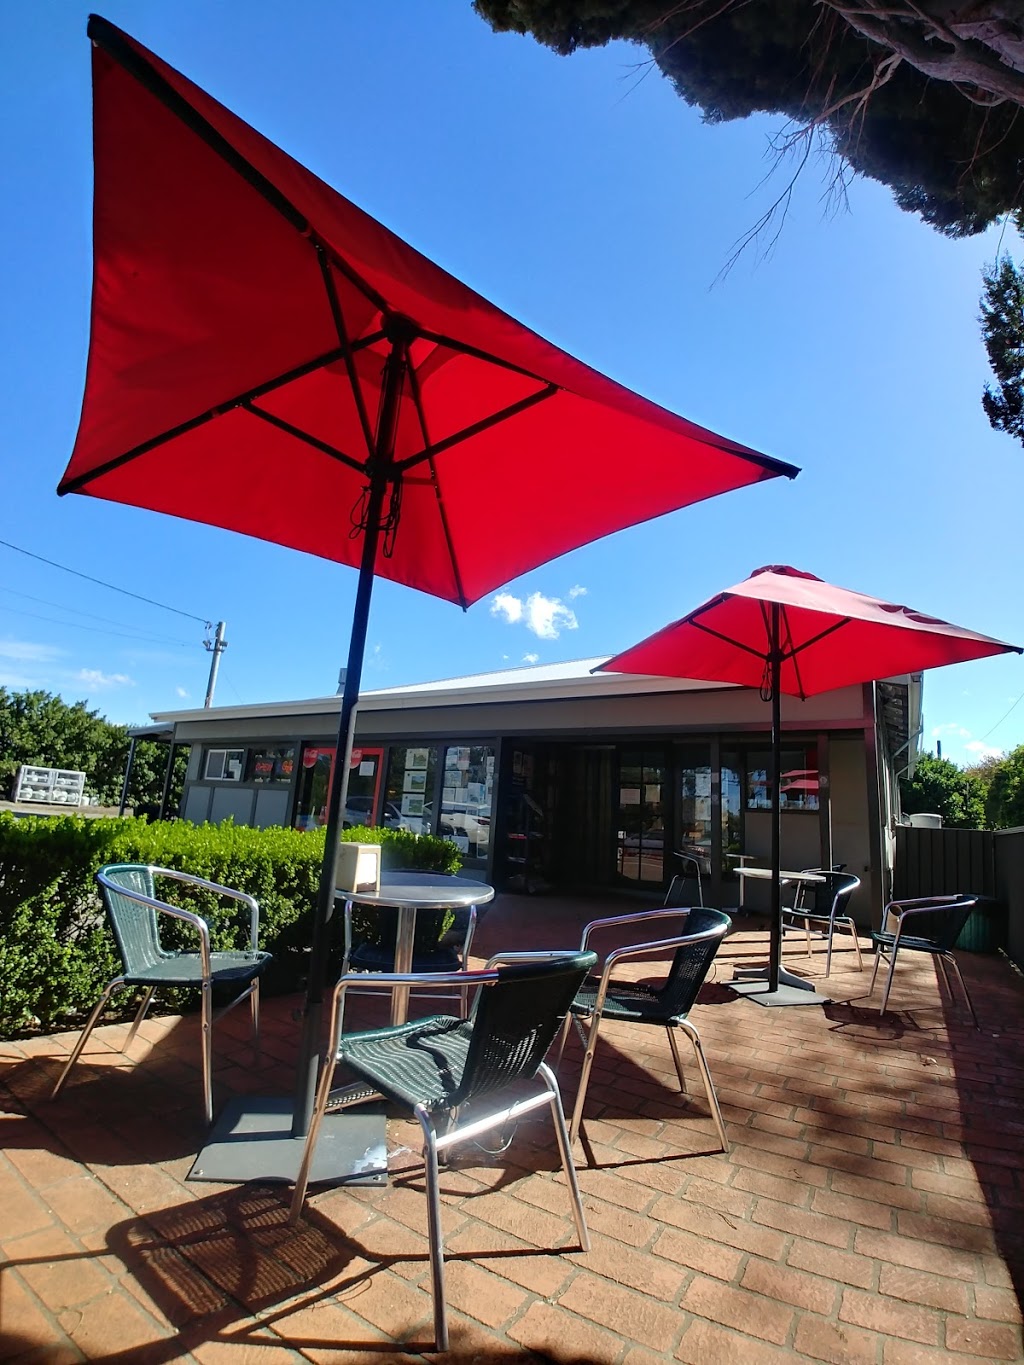 Andys Takeaway And General Store | restaurant | 93-95 Arcadia Rd, Arcadia NSW 2159, Australia